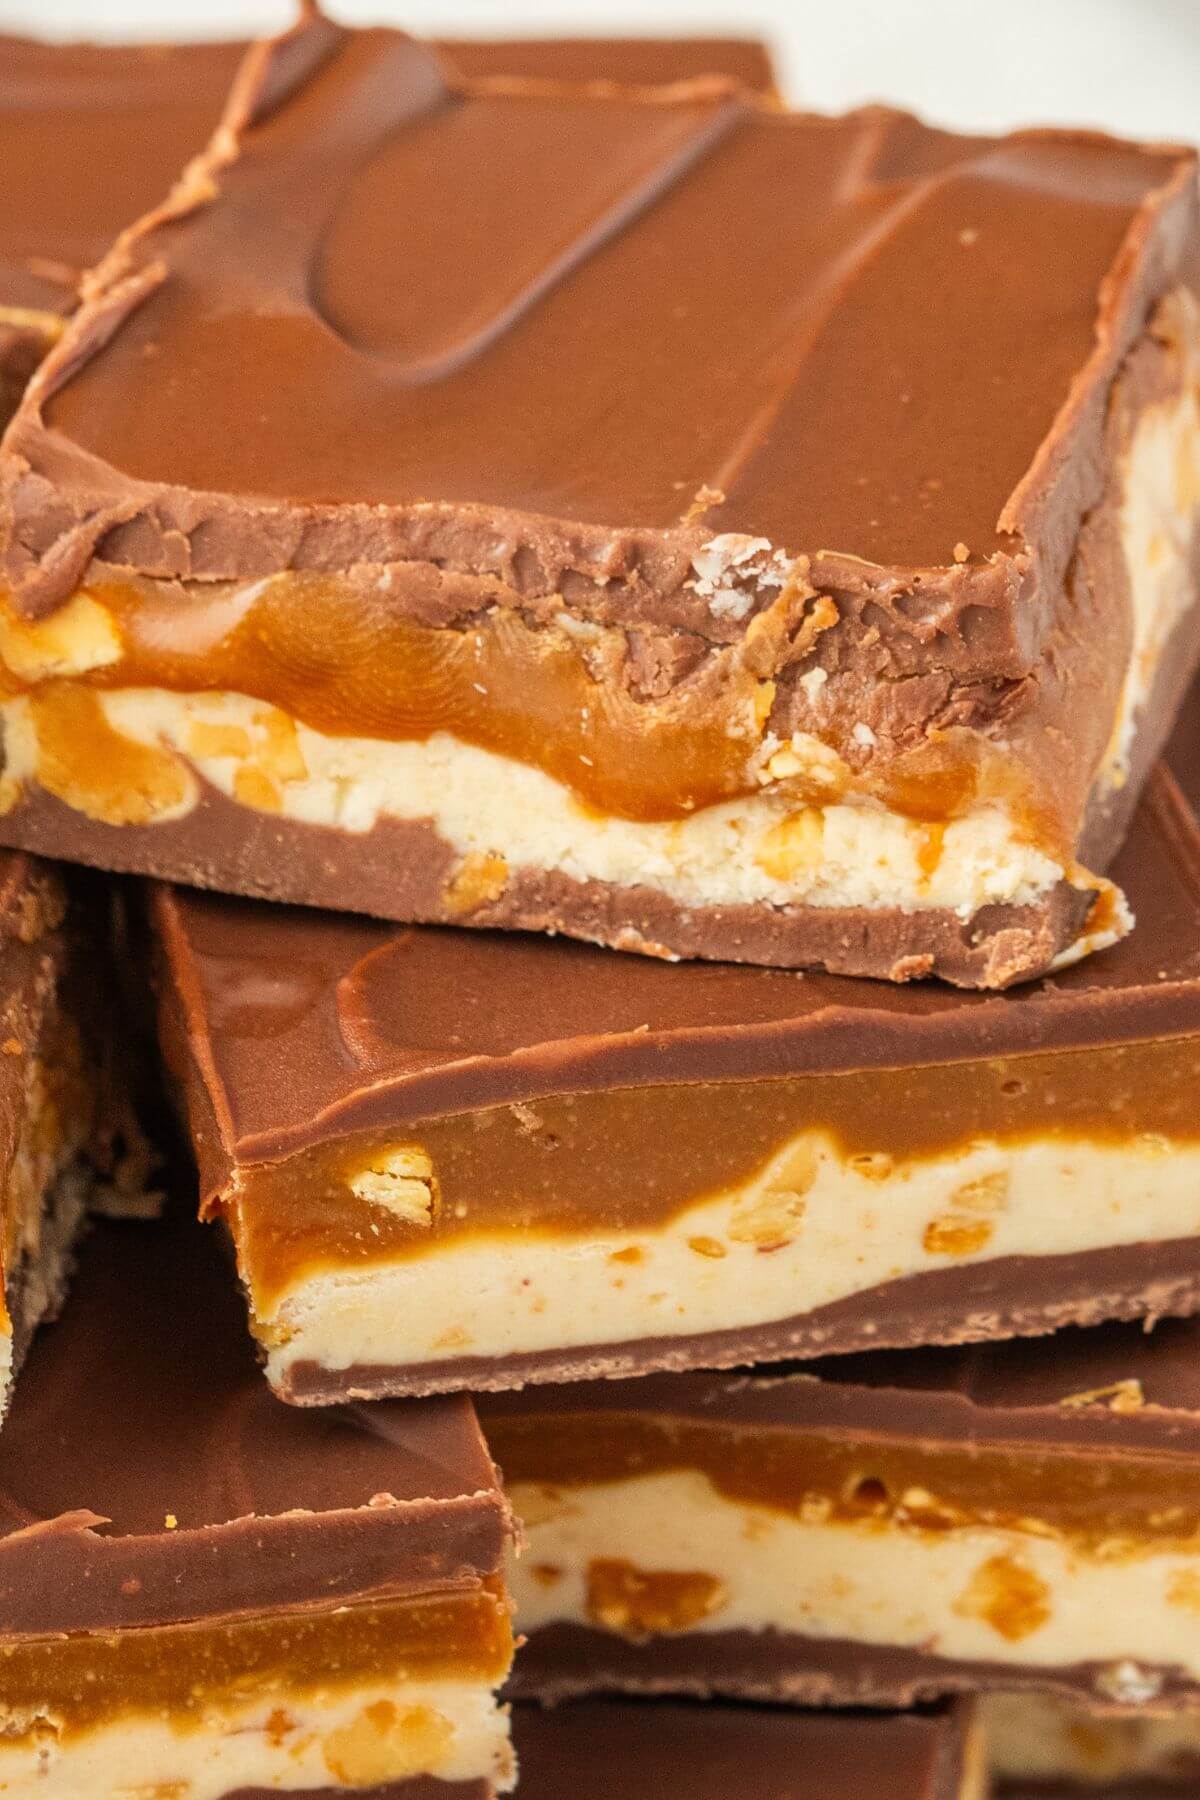 Candy fudge is shown close up in stacks.